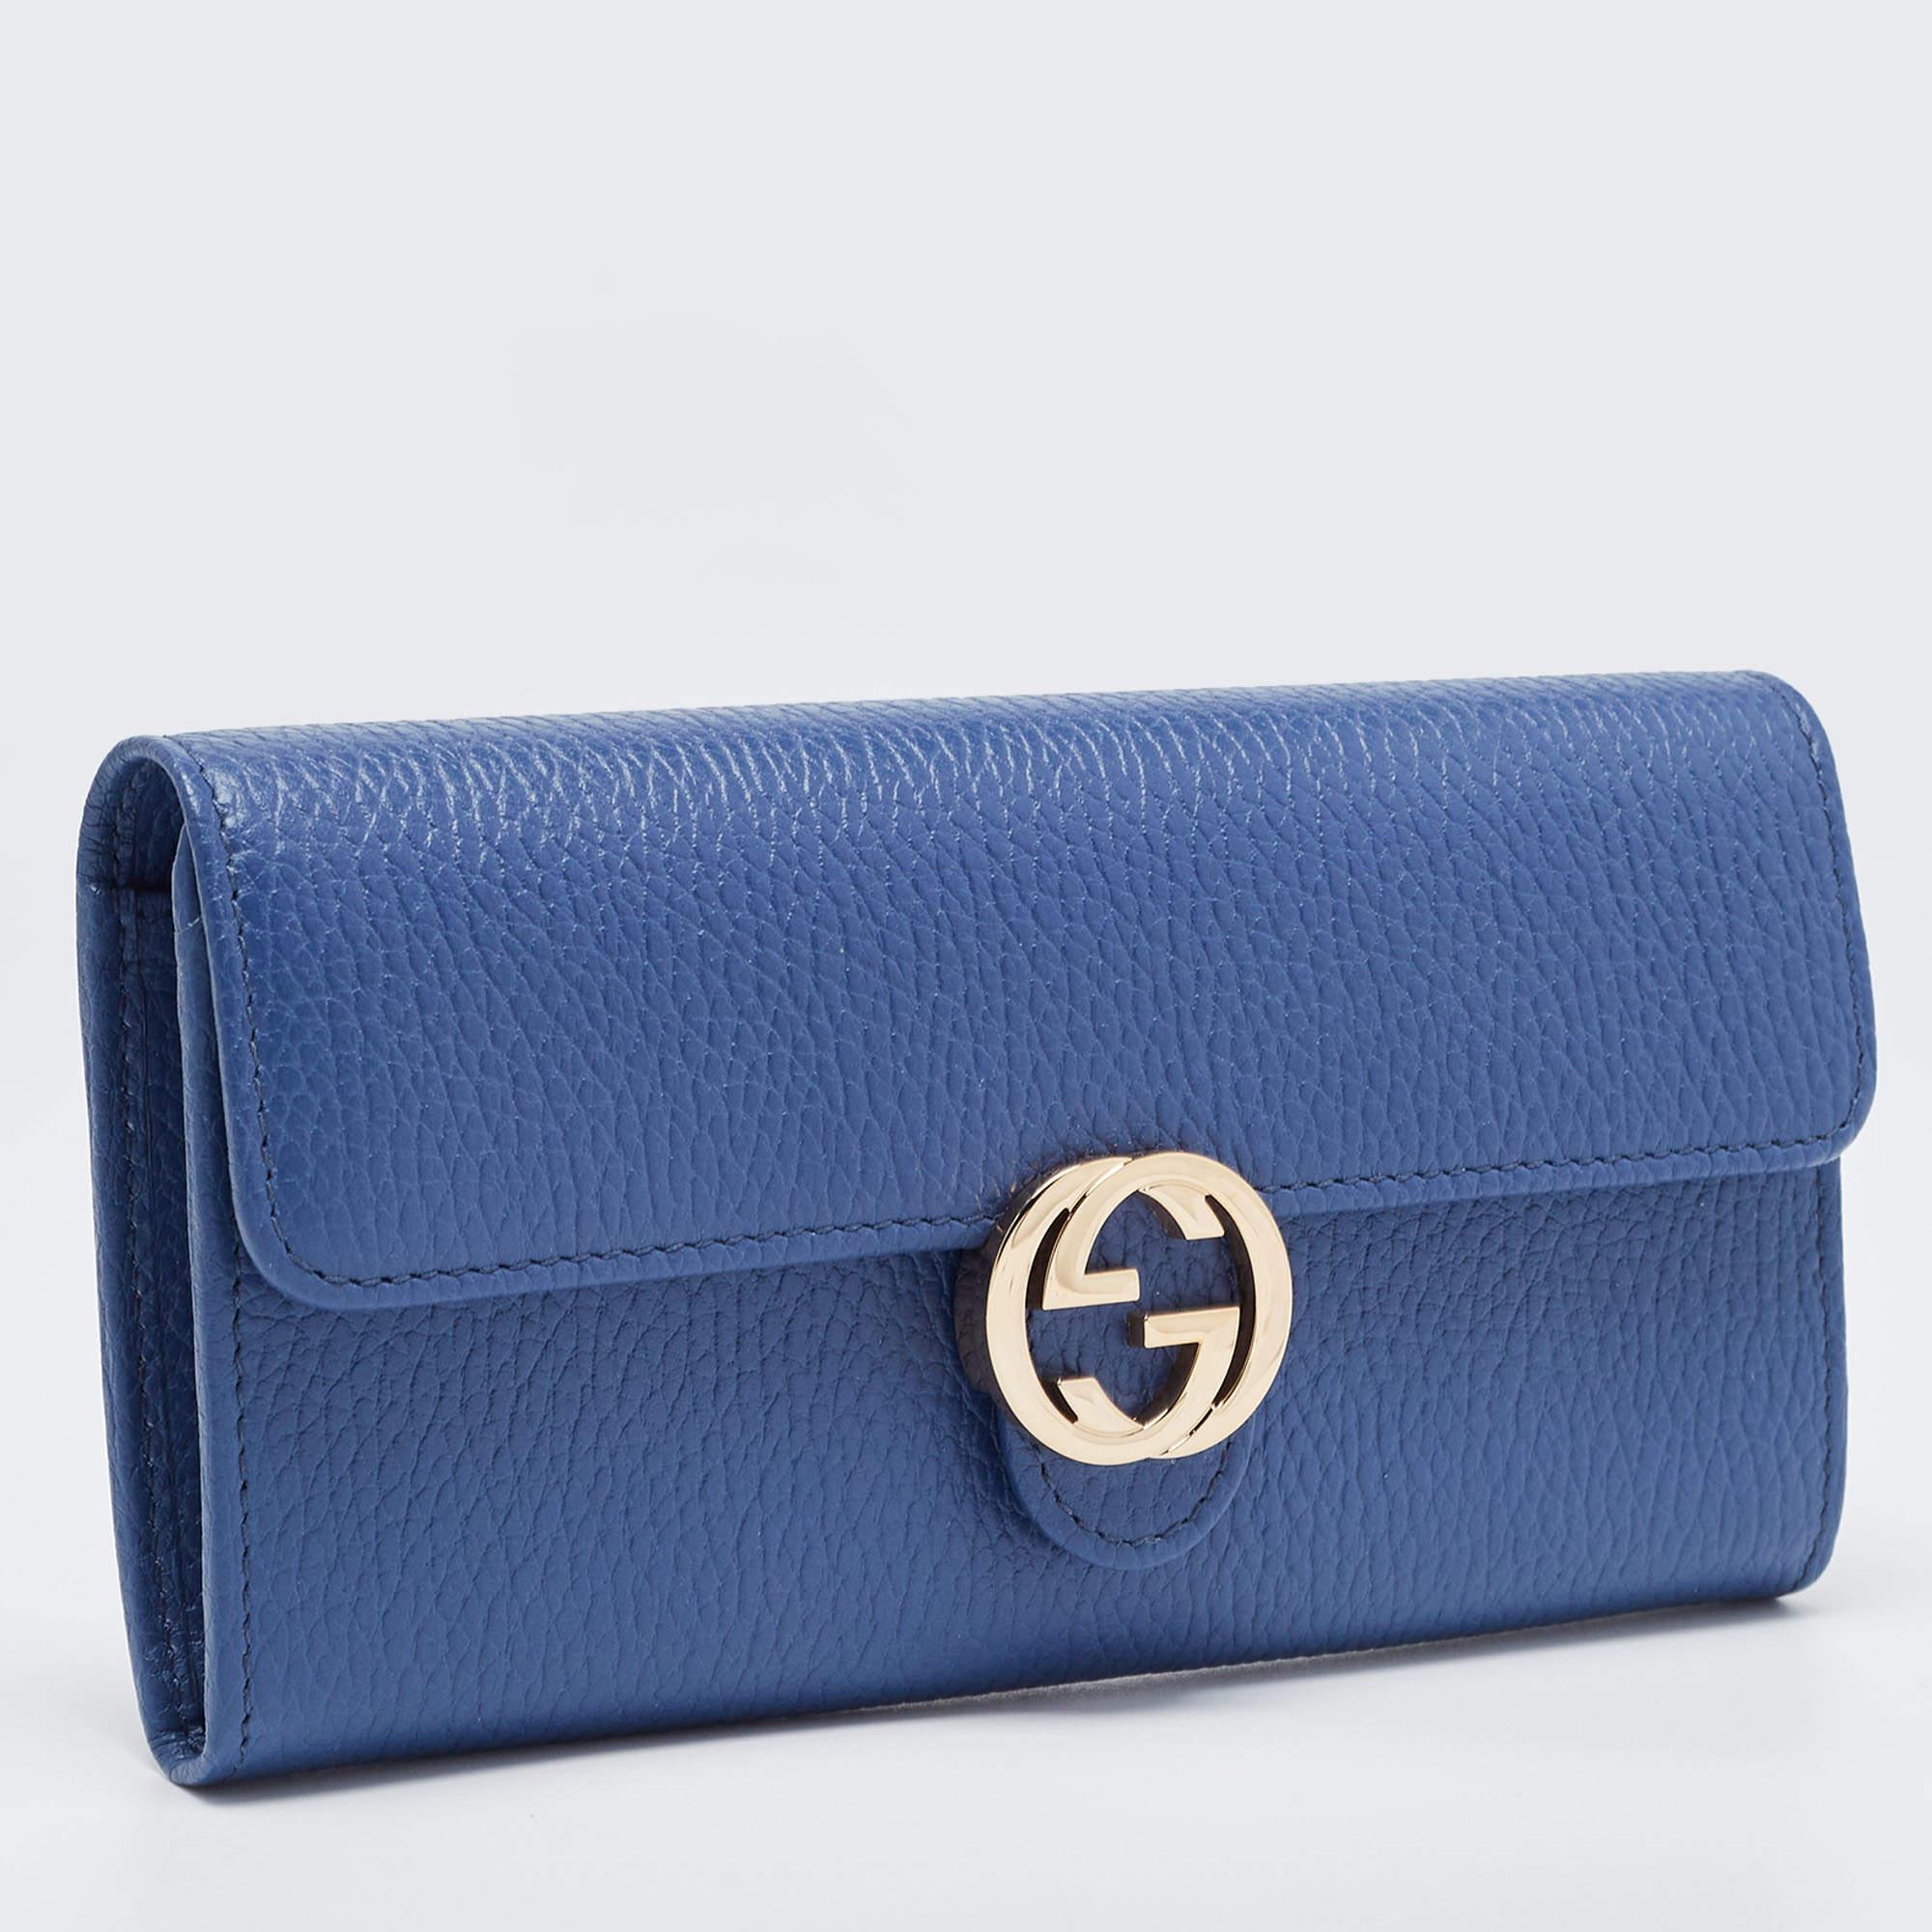 Compact and stylish, this Gucci wallet will be your favorite grab-and-go companion. Designed from quality materials, its interior is divided into different compartments to store your cards and cash perfectly.

